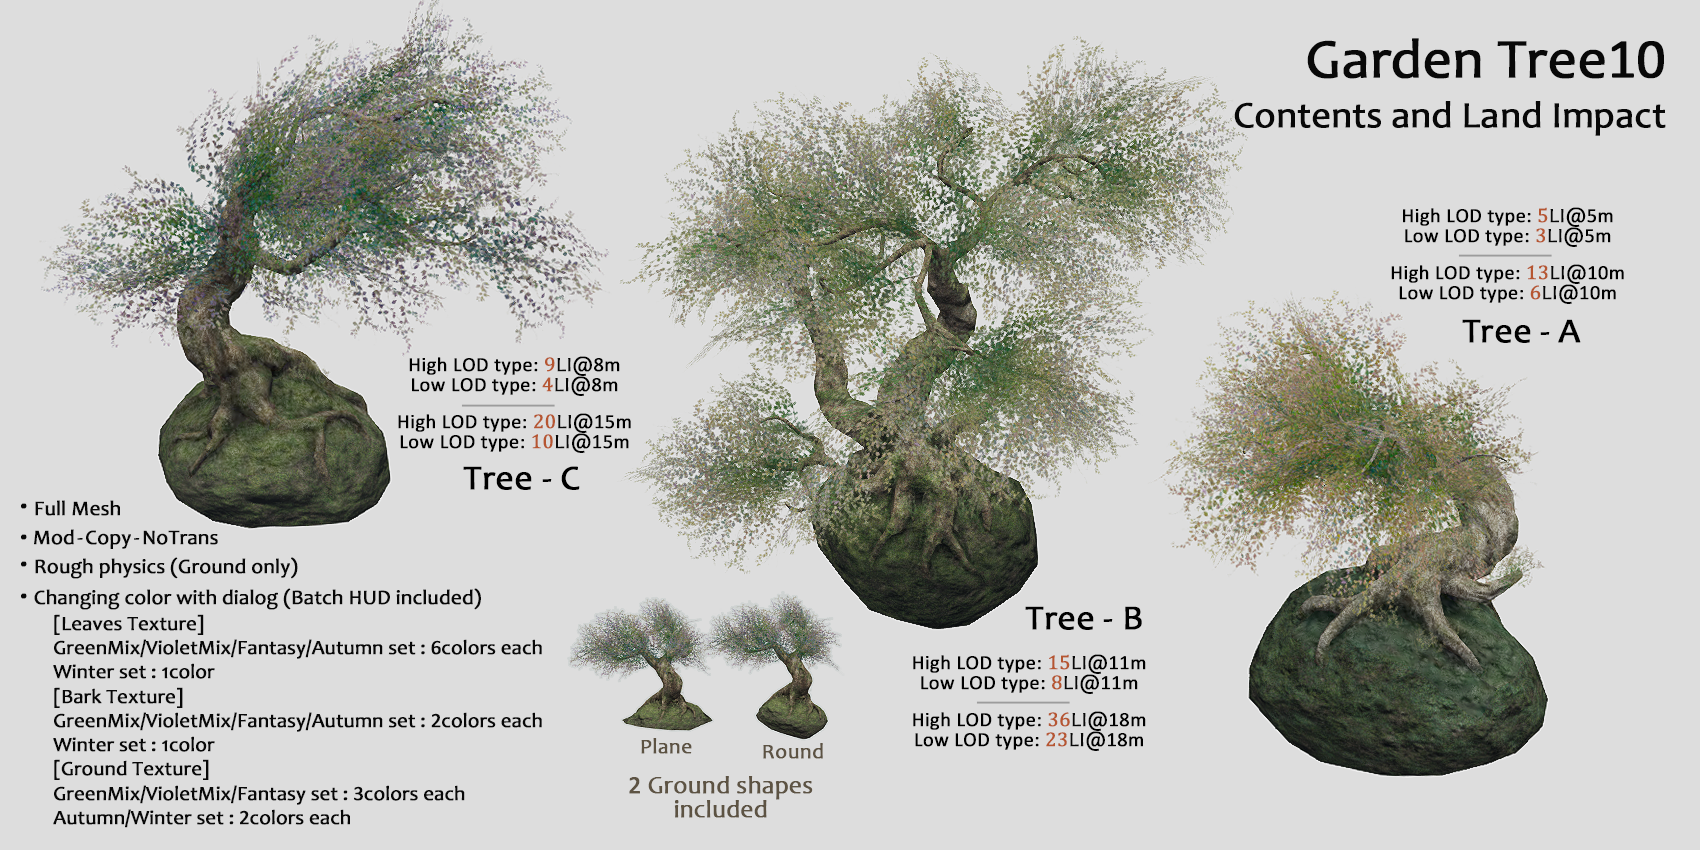 HPMD* Garden Tree10 - Contents and Land Impact